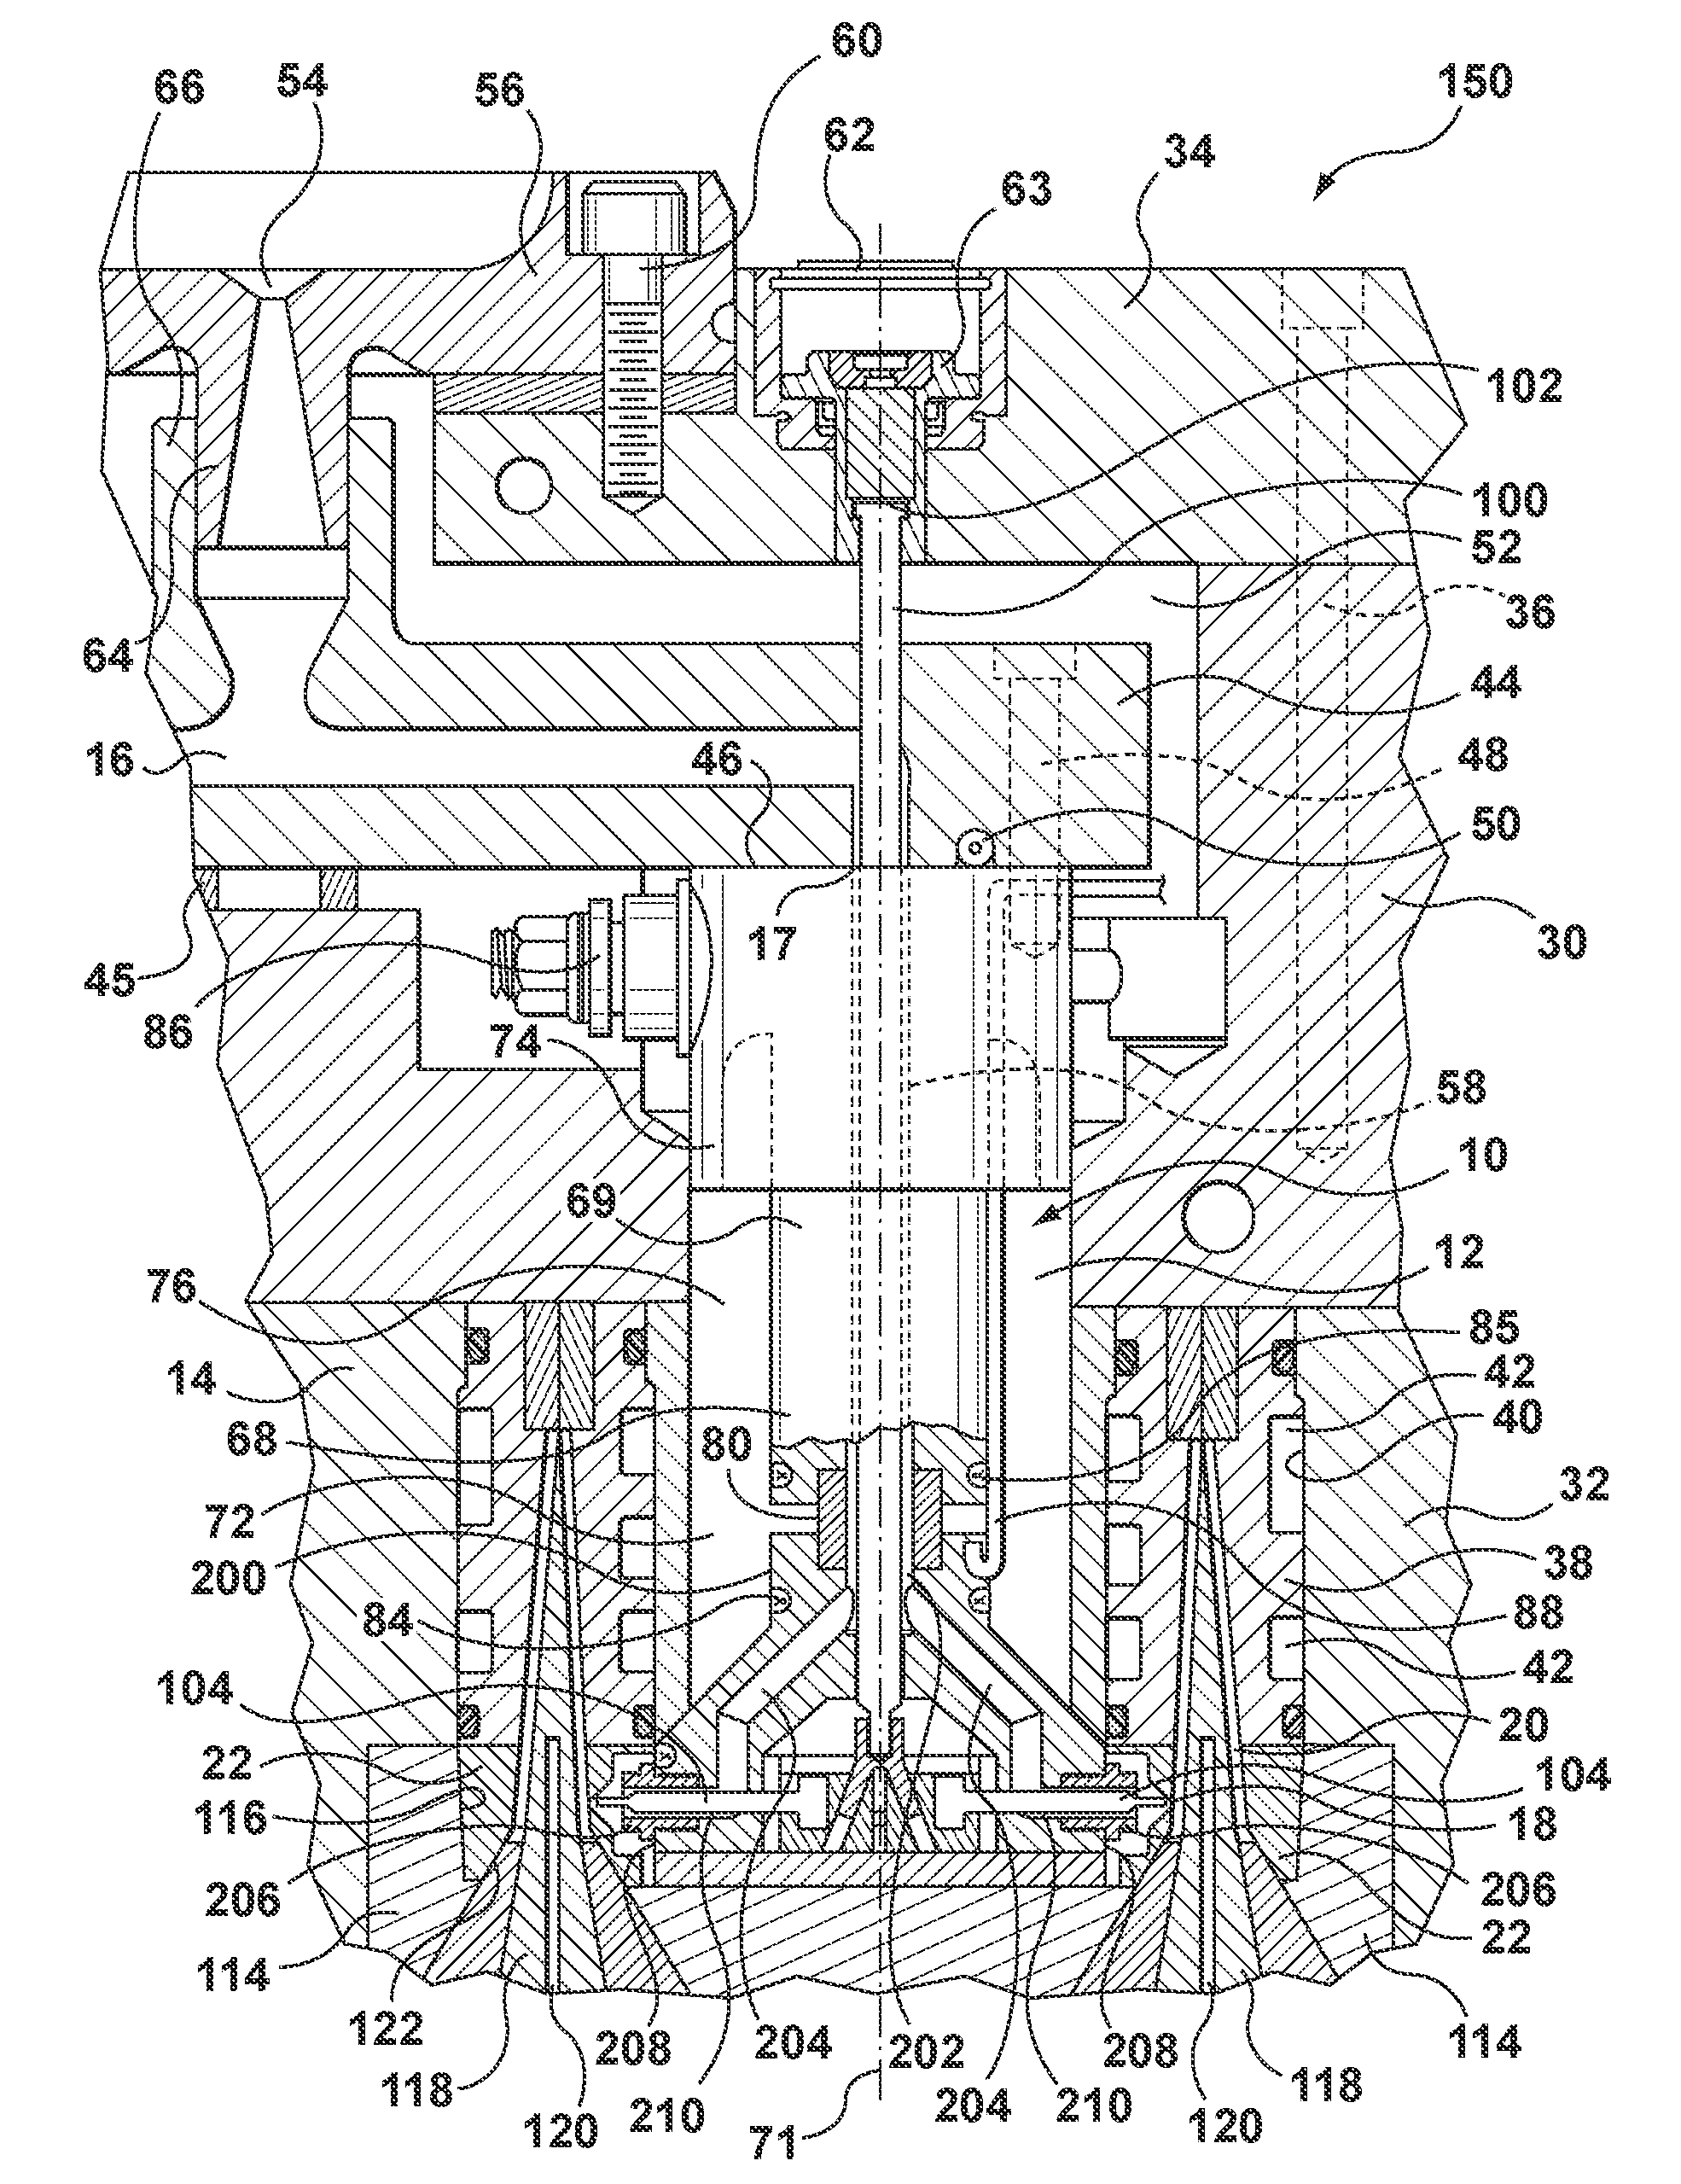 Edge Gated Injection Molding Apparatus